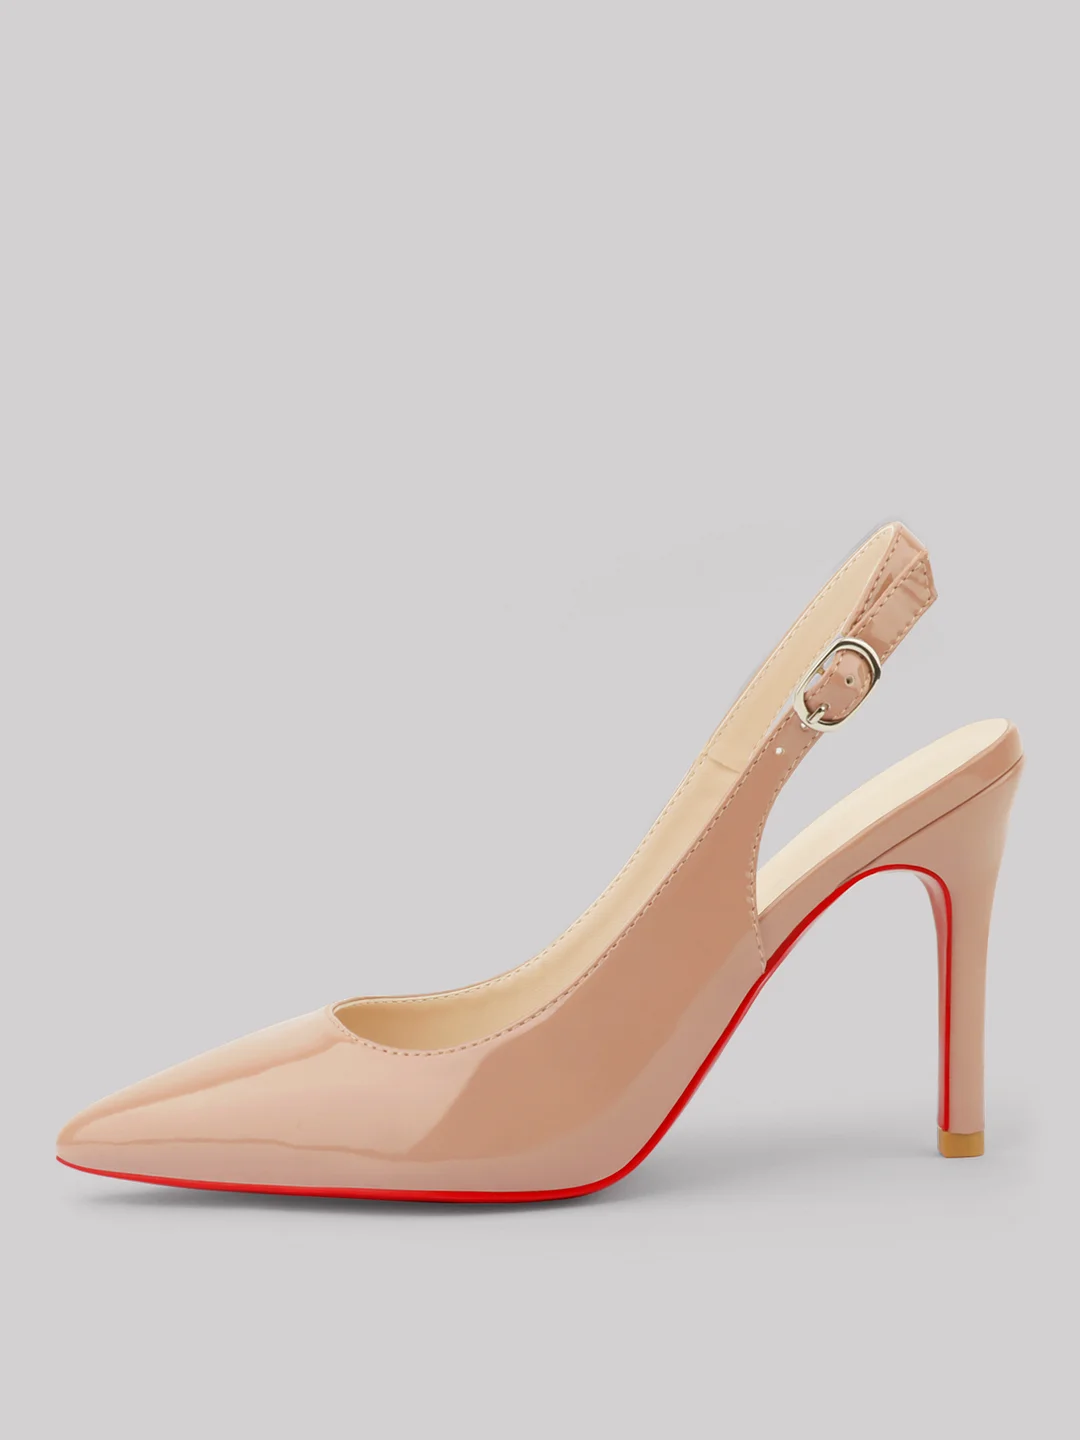 85mm Mid Heels for Women Slingback Pumps Sandals Pointed Toe Pumps Red Bottoms Shoes